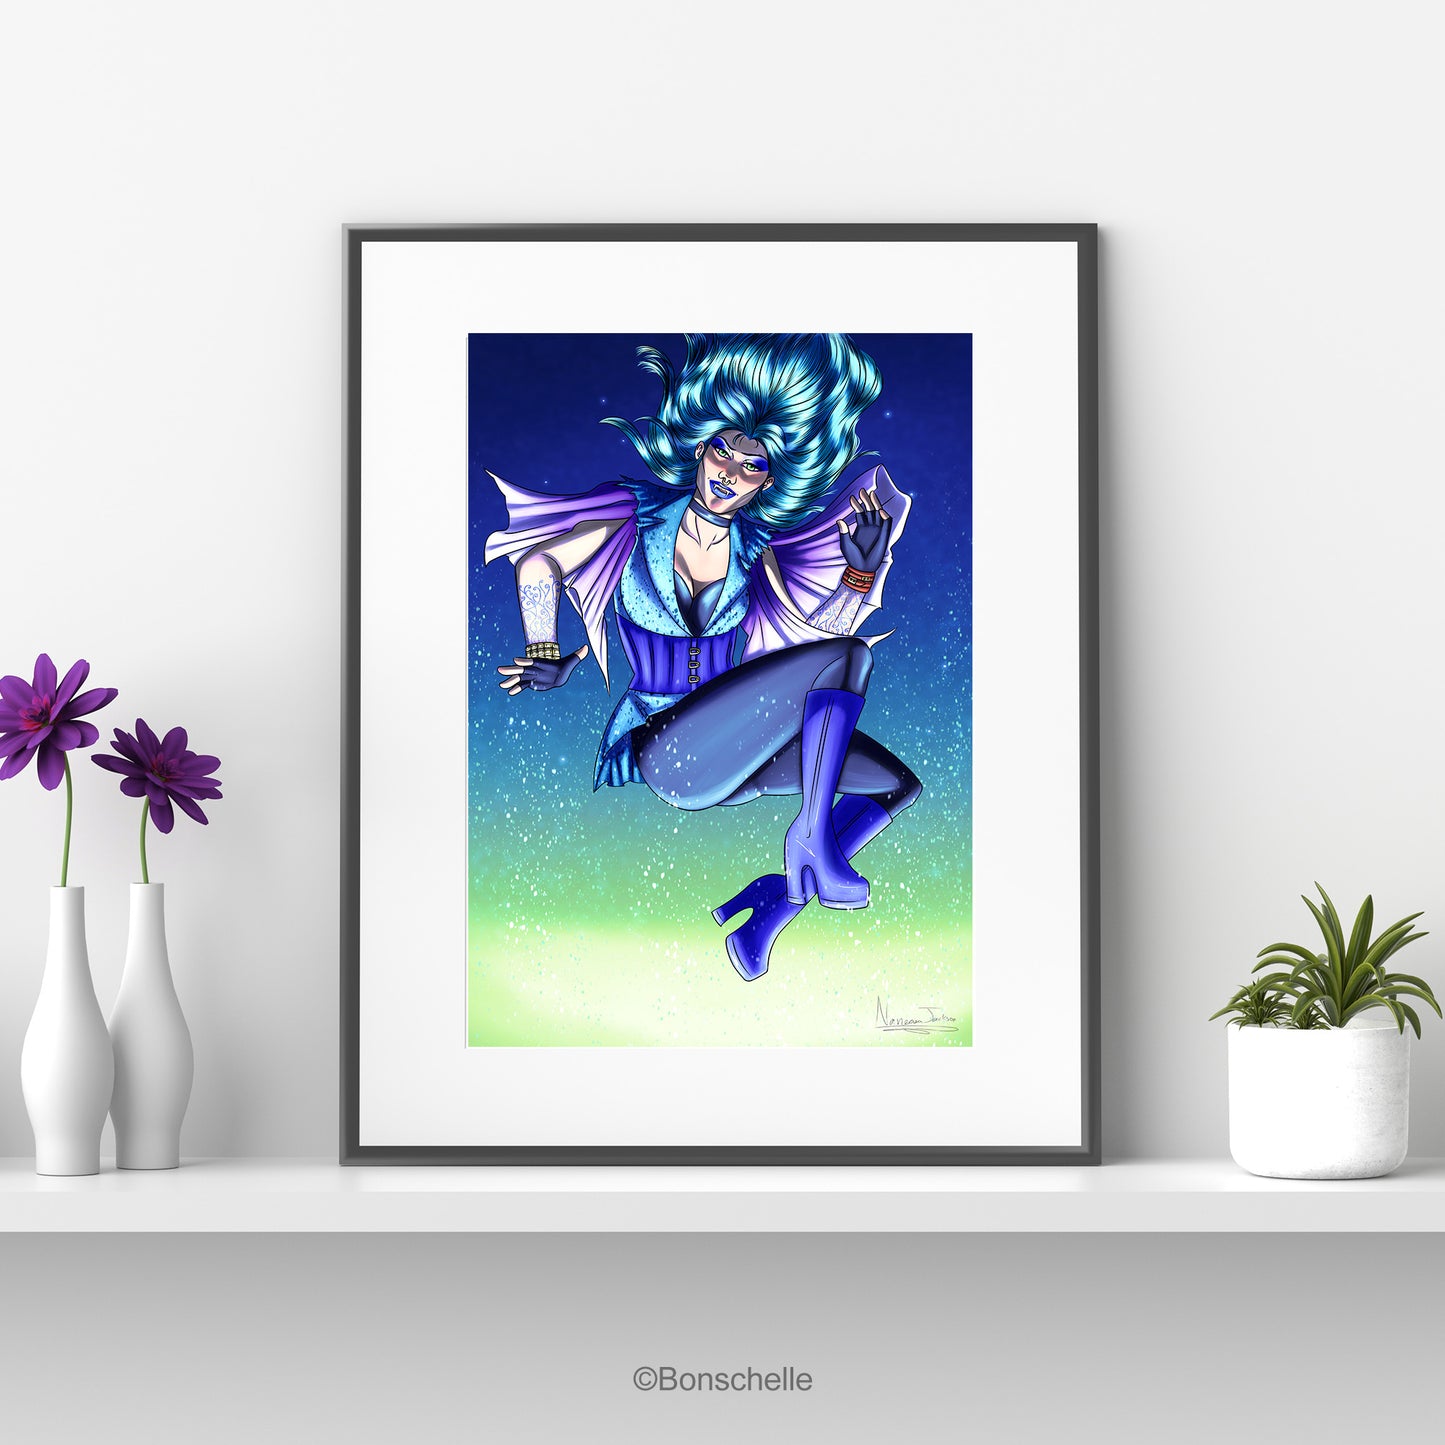 An original art print in which a vampire-witch with electric-blue hair flies in the air while the snow falls. The print is mounted on a white background and framed in black. It sits on a white shelf with flowers in vases on one side and a flowerpot on the other.